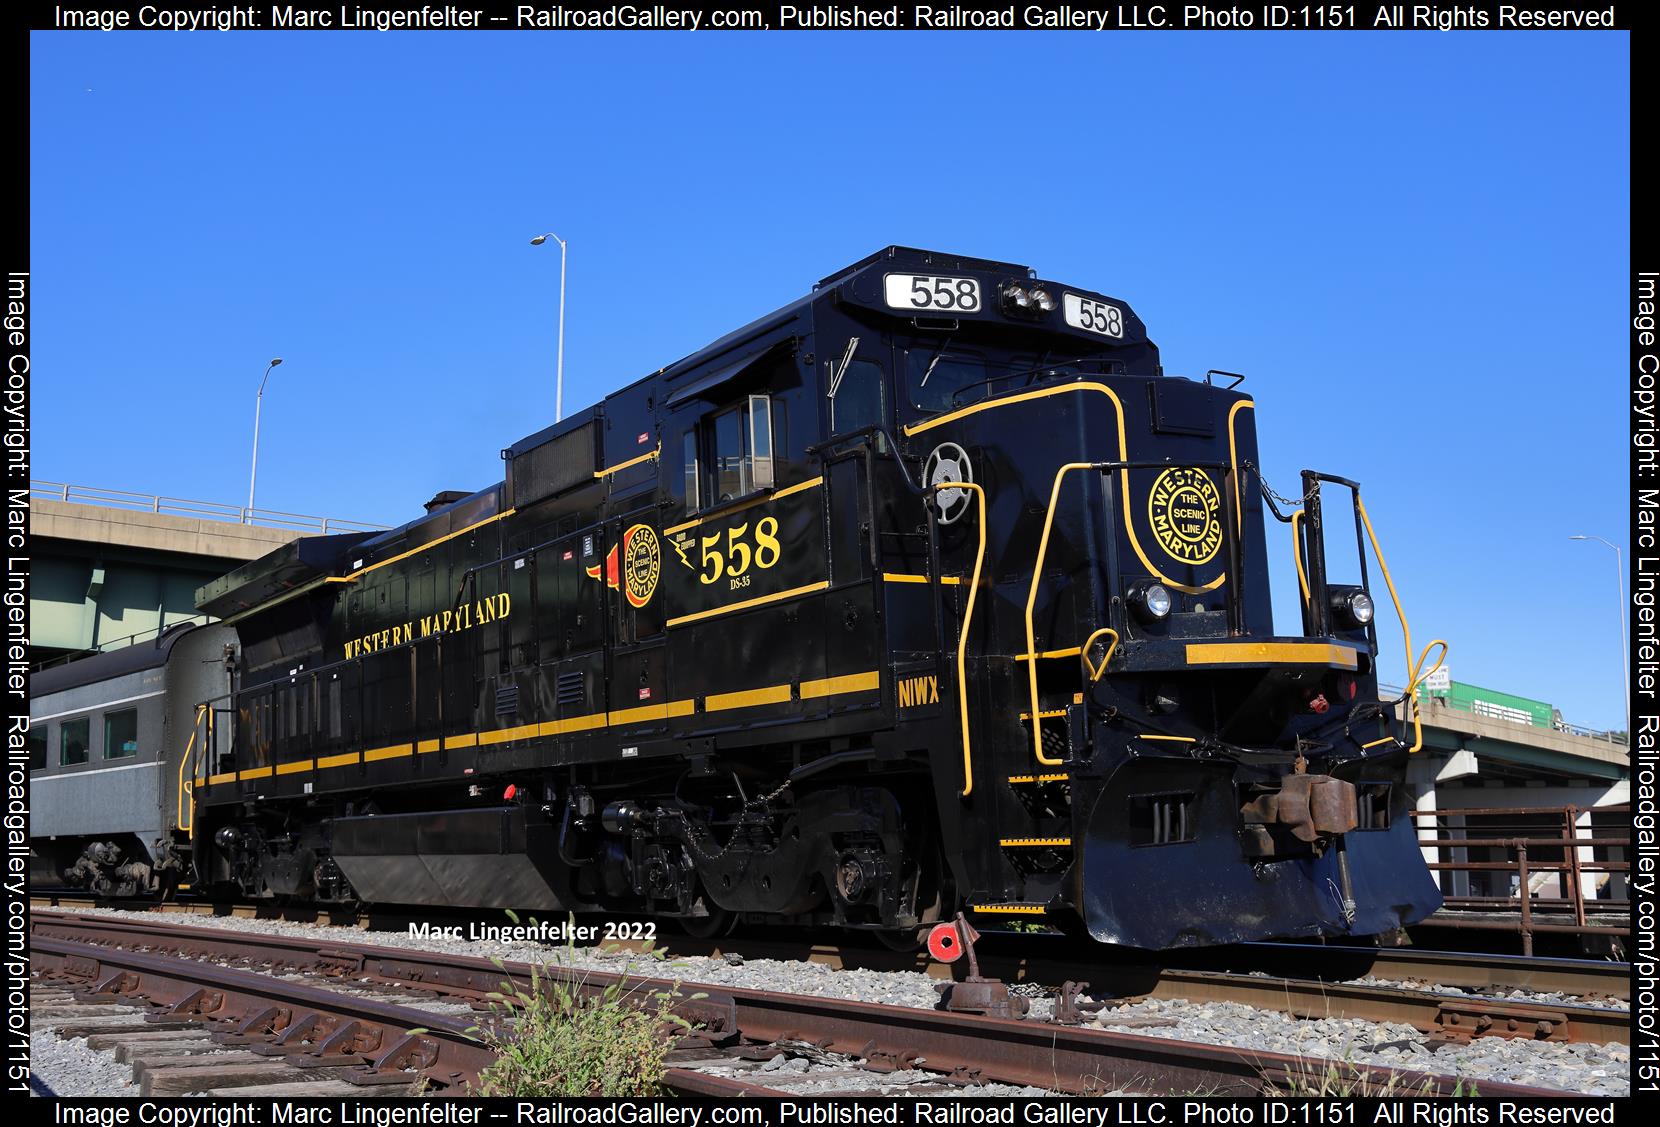 WMSR 558 is a class GE B32-8 (Dash 8-32B) and  is pictured in Cumberland, Maryland, USA.  This was taken along the WMSR Mainline Station on the Western Maryland Scenic Railroad. Photo Copyright: Marc Lingenfelter uploaded to Railroad Gallery on 06/19/2023. This photograph of WMSR 558 was taken on Friday, September 23, 2022. All Rights Reserved. 